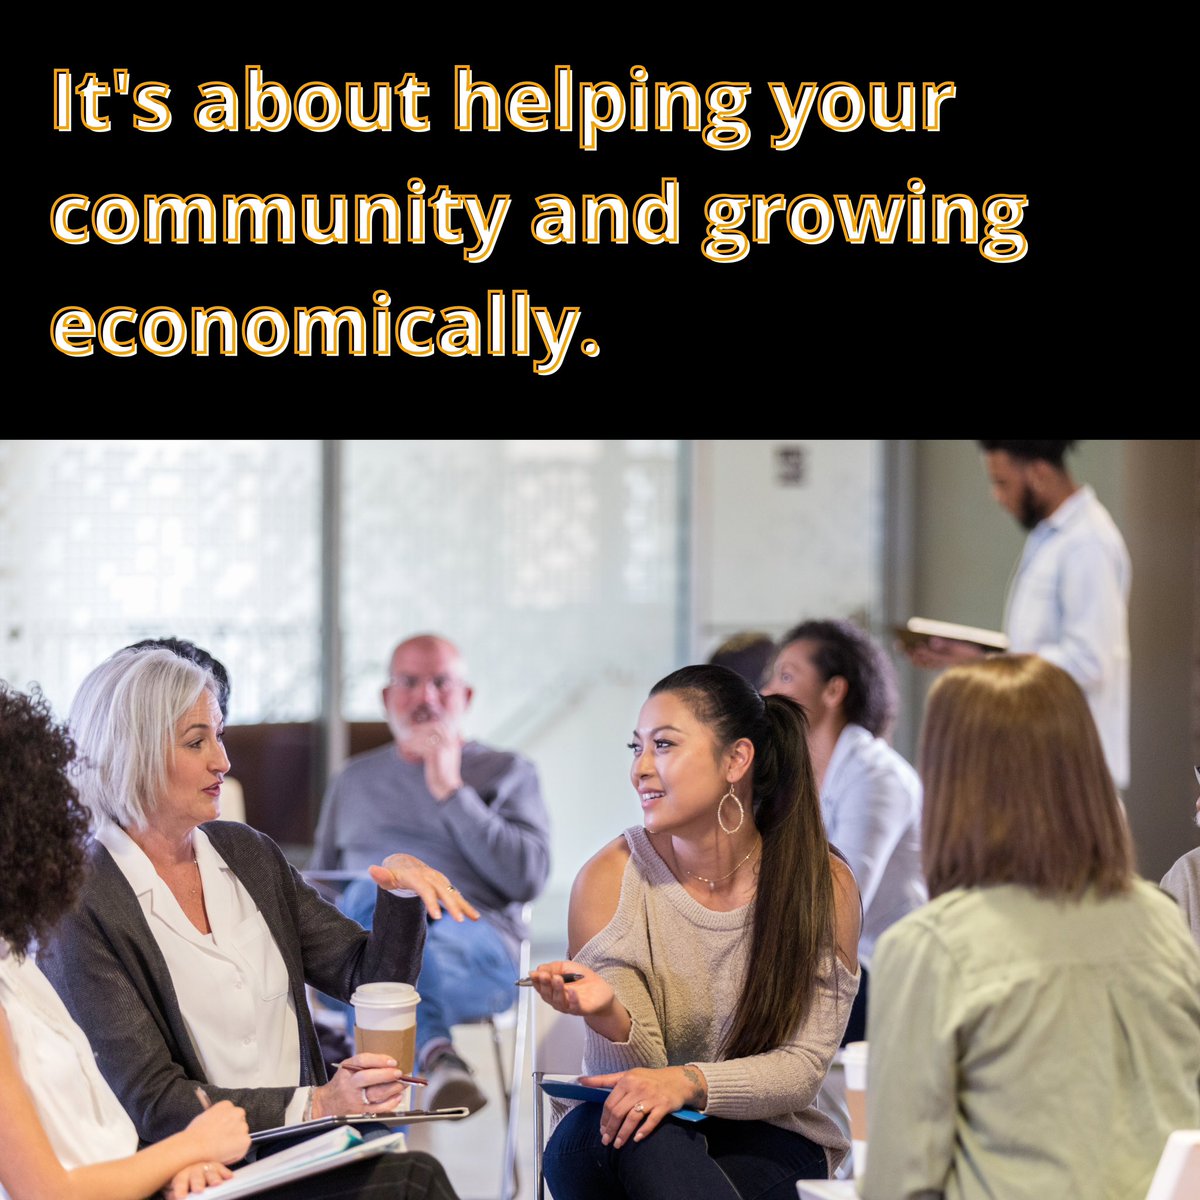 It’s about helping your community and growing economically. 🐝

#TechRealEstateUSA
#PropertyTech
#RealEstateInnovation
#SmartHomeUSA
#PropTechSolutions
#TechPropertyMarket
#RealEstateAppsUSA
#FutureOfHousing
#DigitalRealEstate
#InnovateREtech